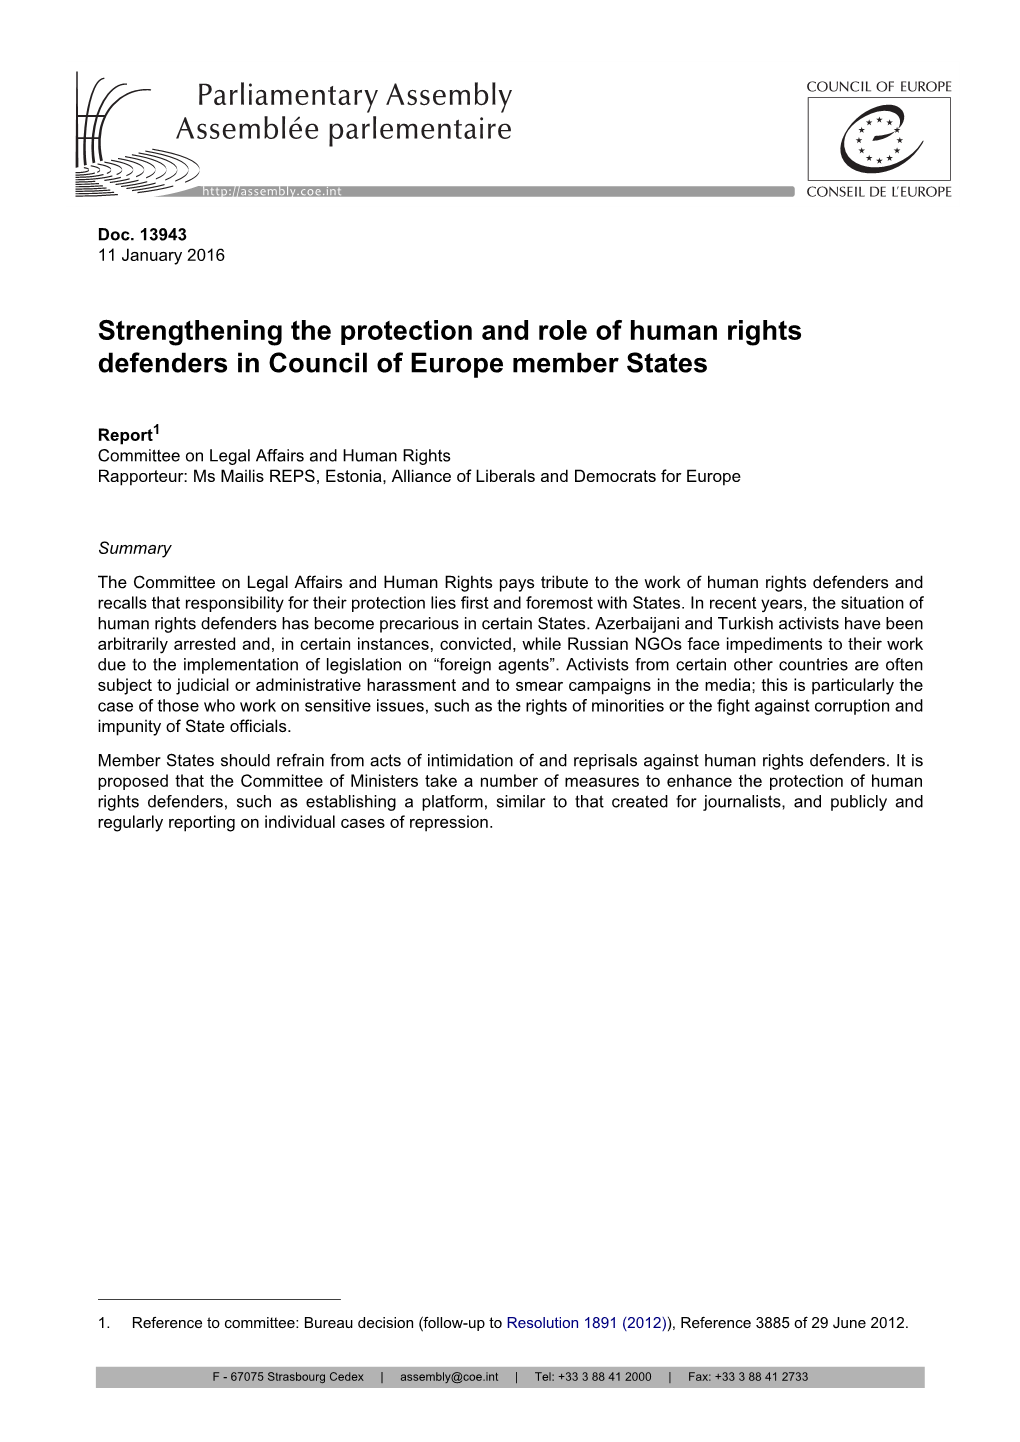 Strengthening the Protection and Role of Human Rights Defenders in Council of Europe Member States